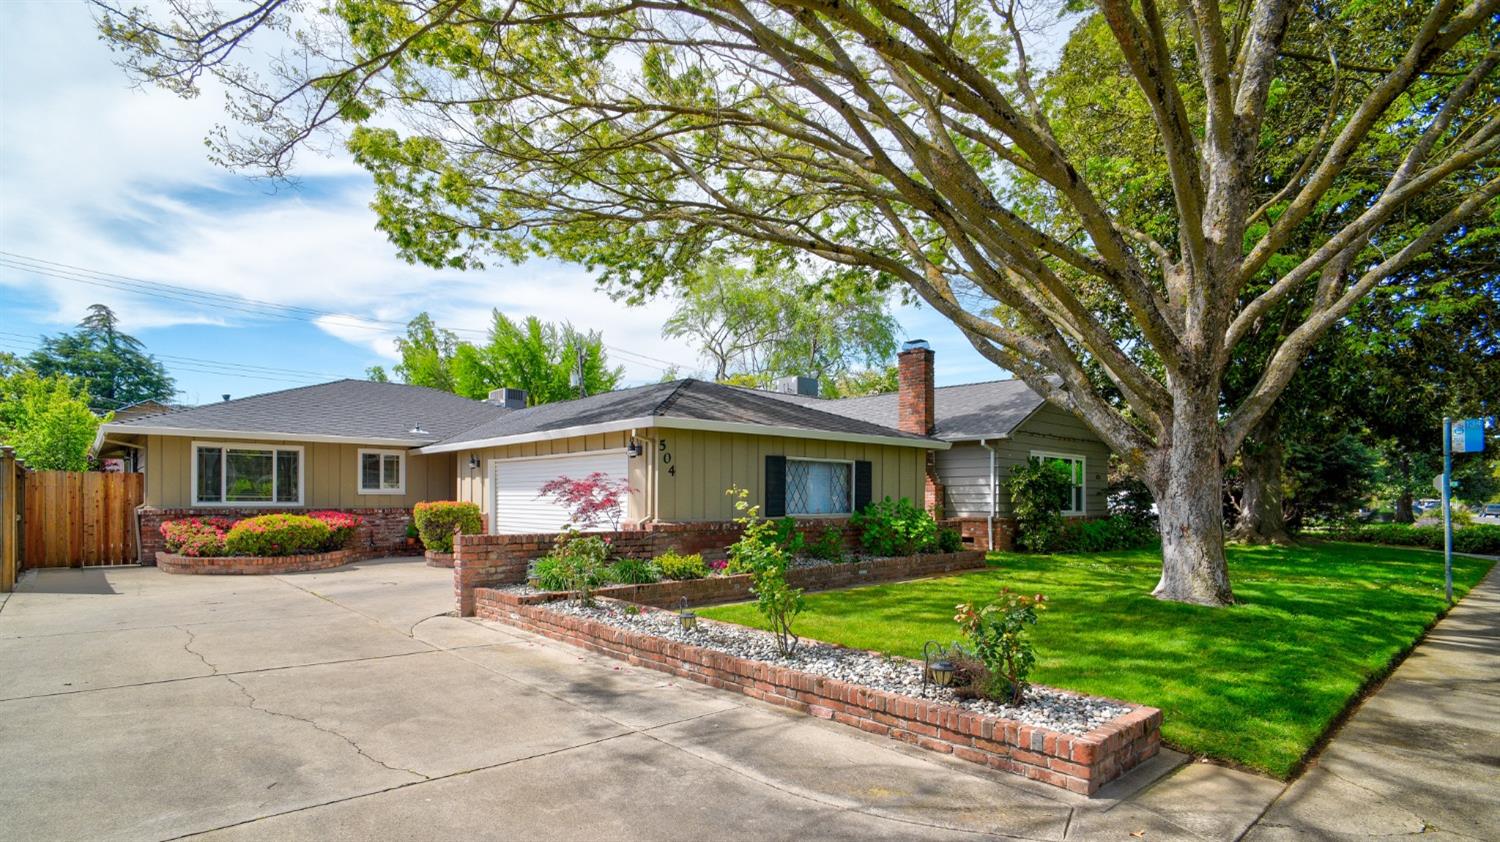 Rare opportunity to own a charming East Sacramento home in the highly desirable McKinley Park area. 